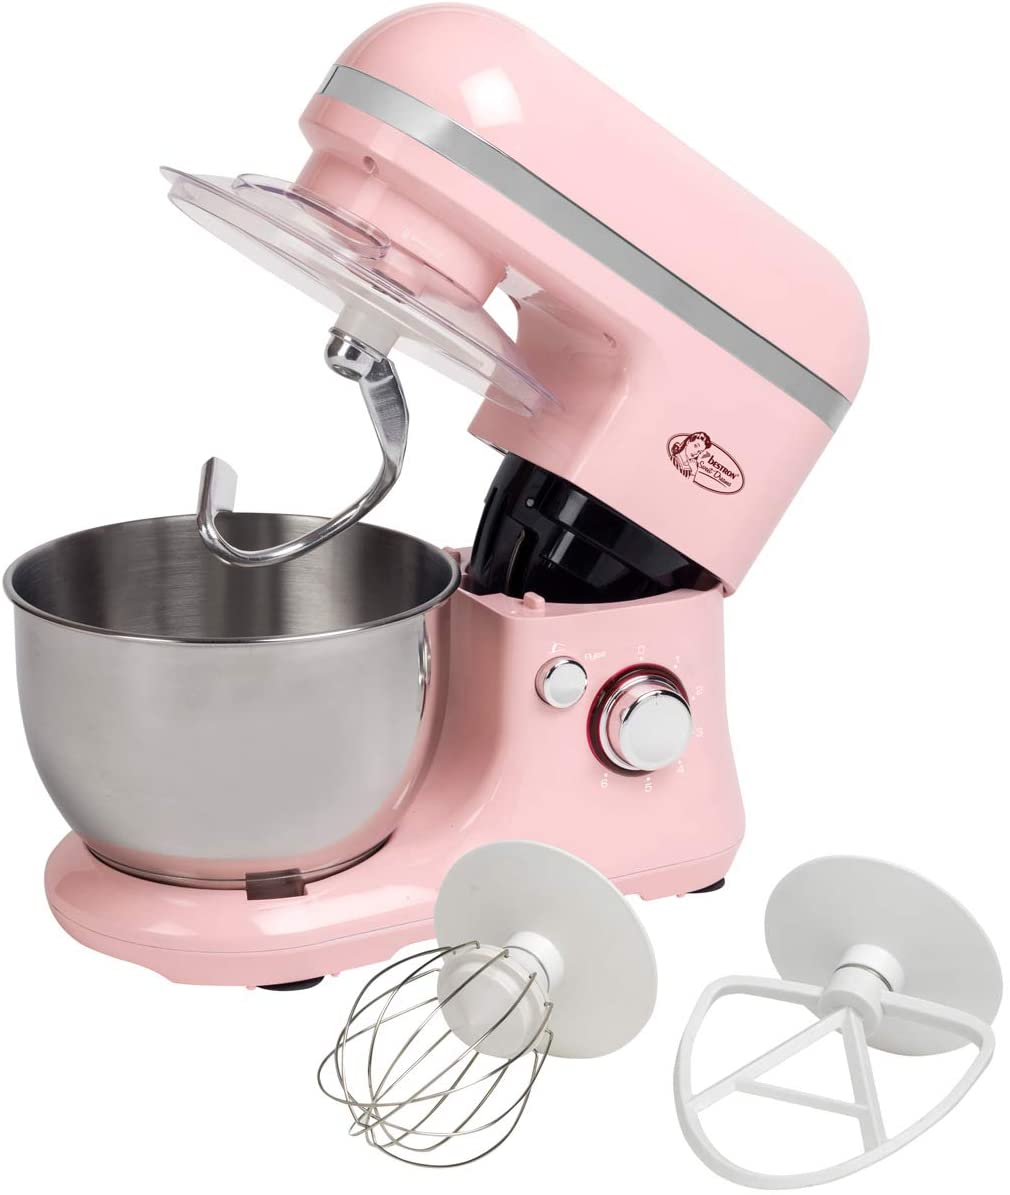 Bestron Sweet Dreams 1000 Watt Retro Design Food Processor with Whisk, Dough Hook and Stirring Arm - Pink